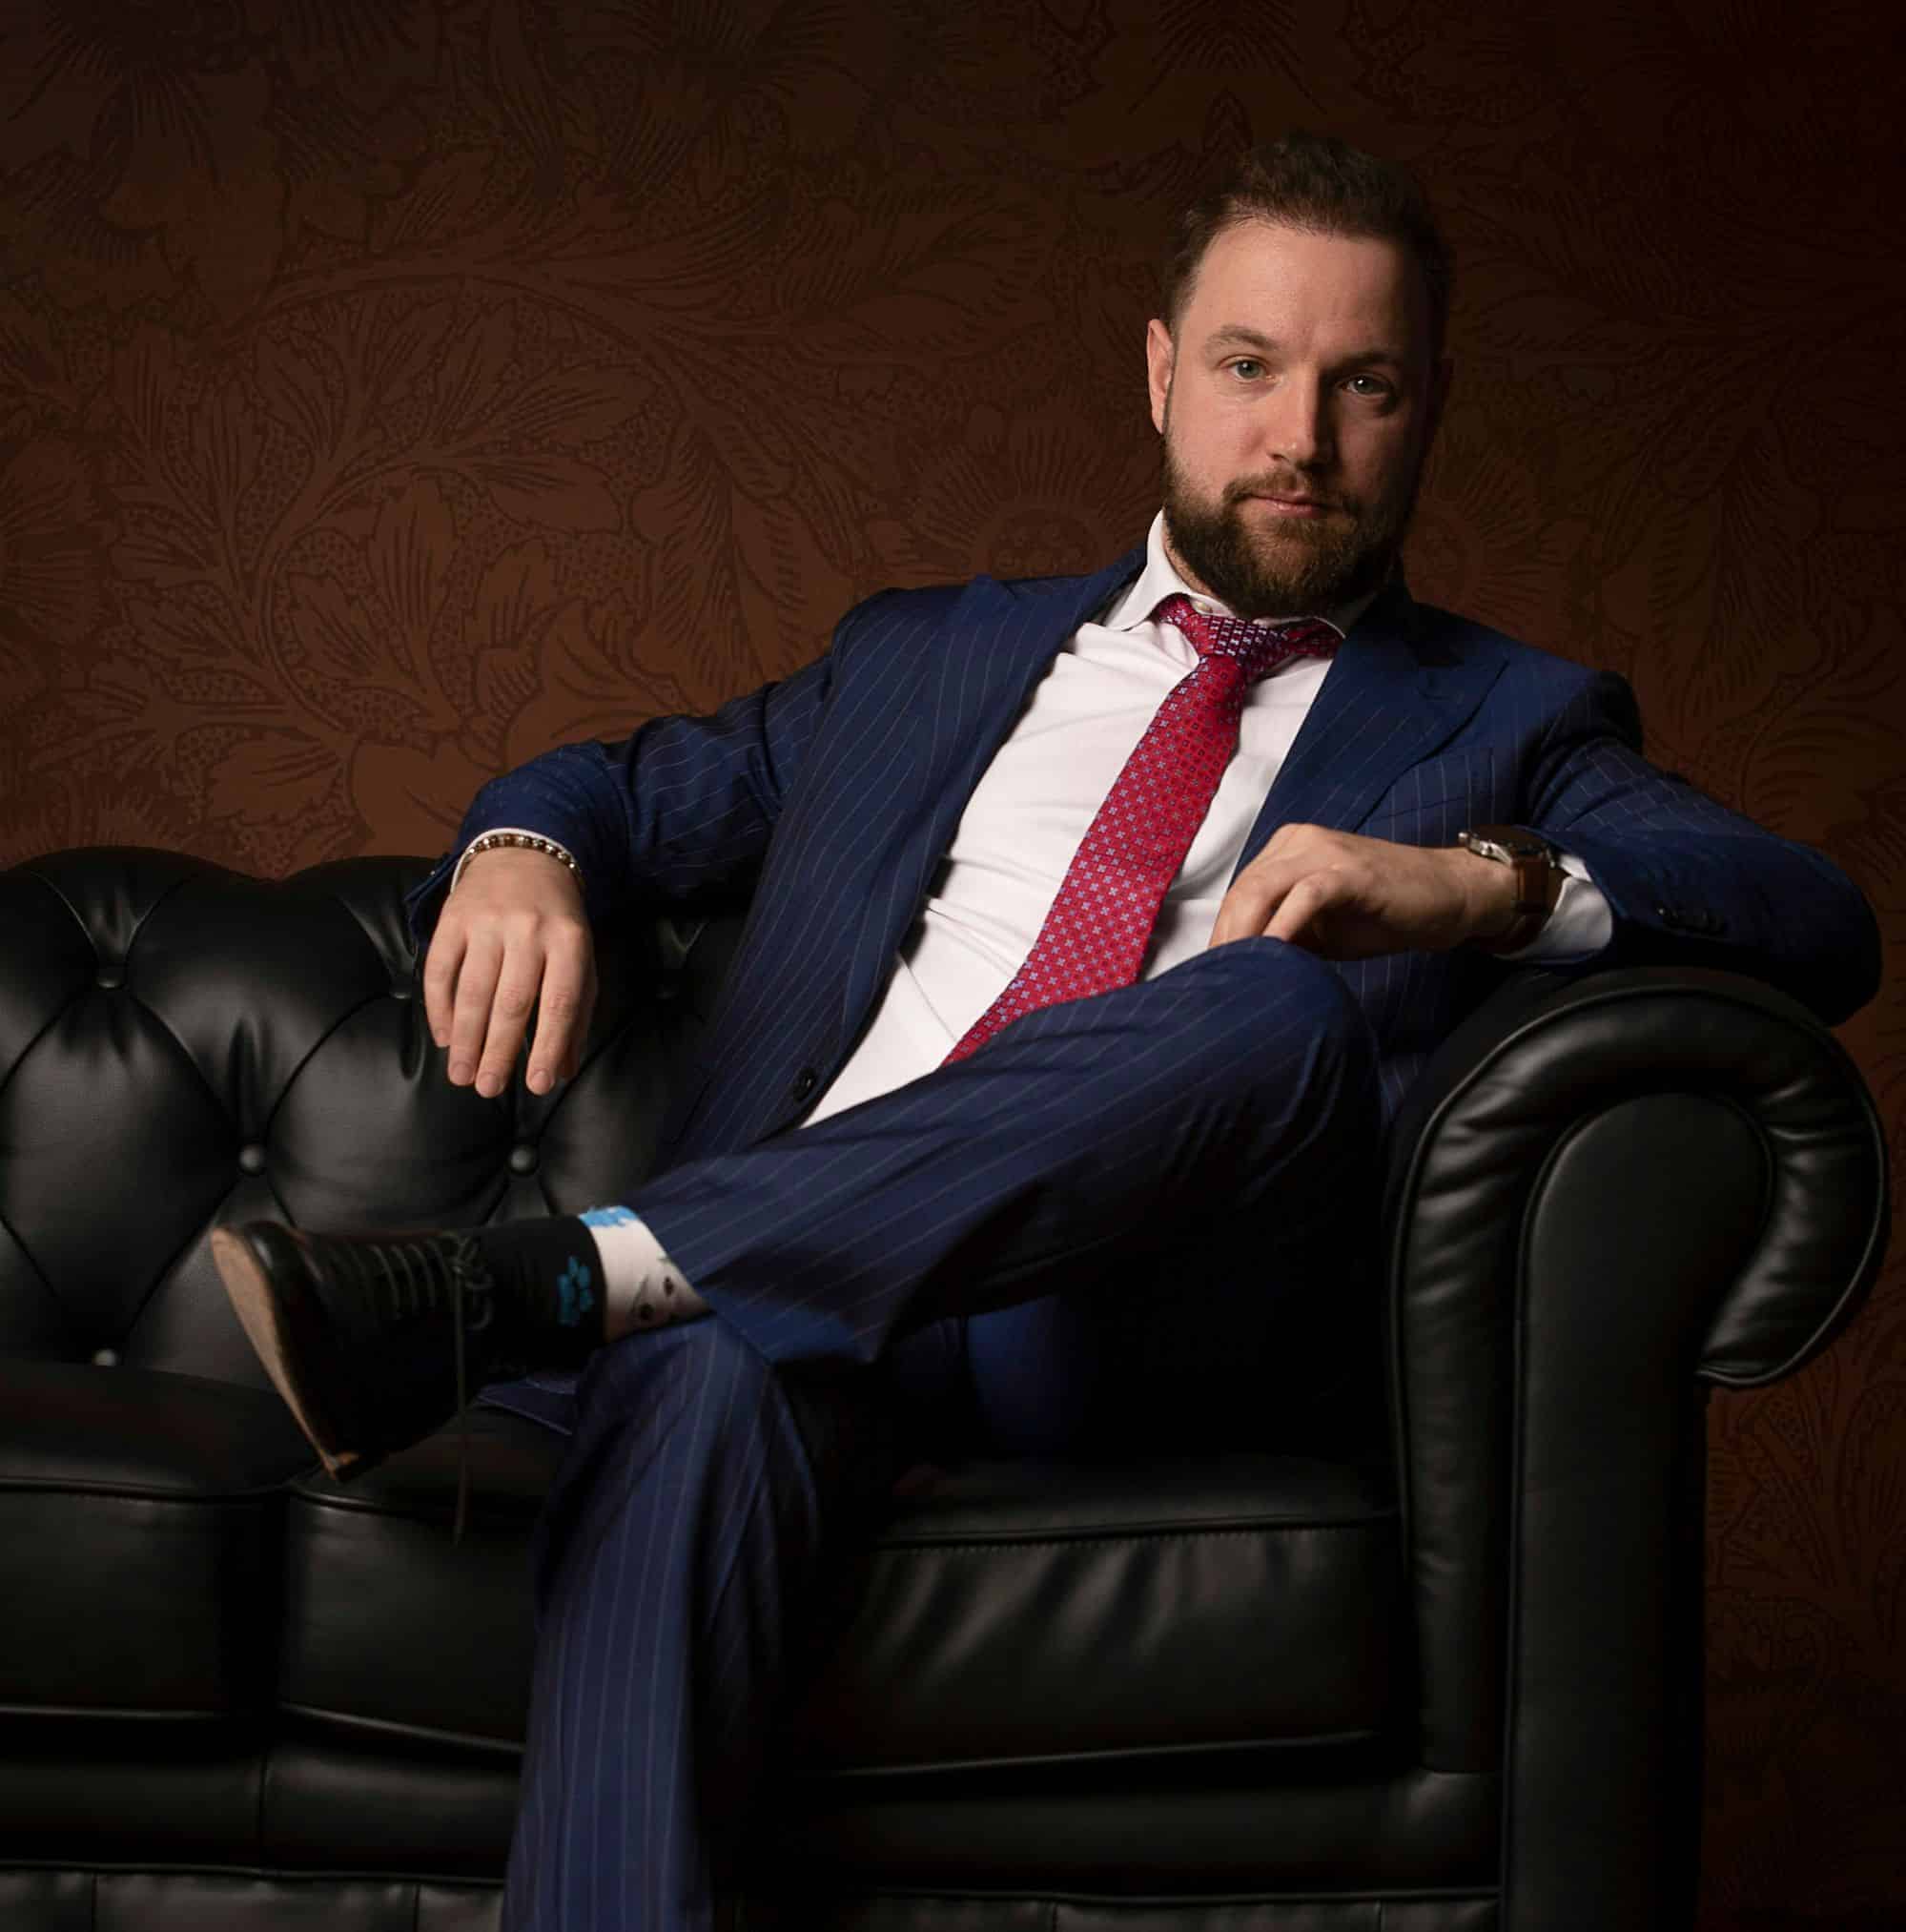 A man with a dark beard and hair, in a blue suit and red tie, sits on a black leather sofa against a dark patterned background, embodying the ethos of the style office as he dreams of how to create a fashion brand.